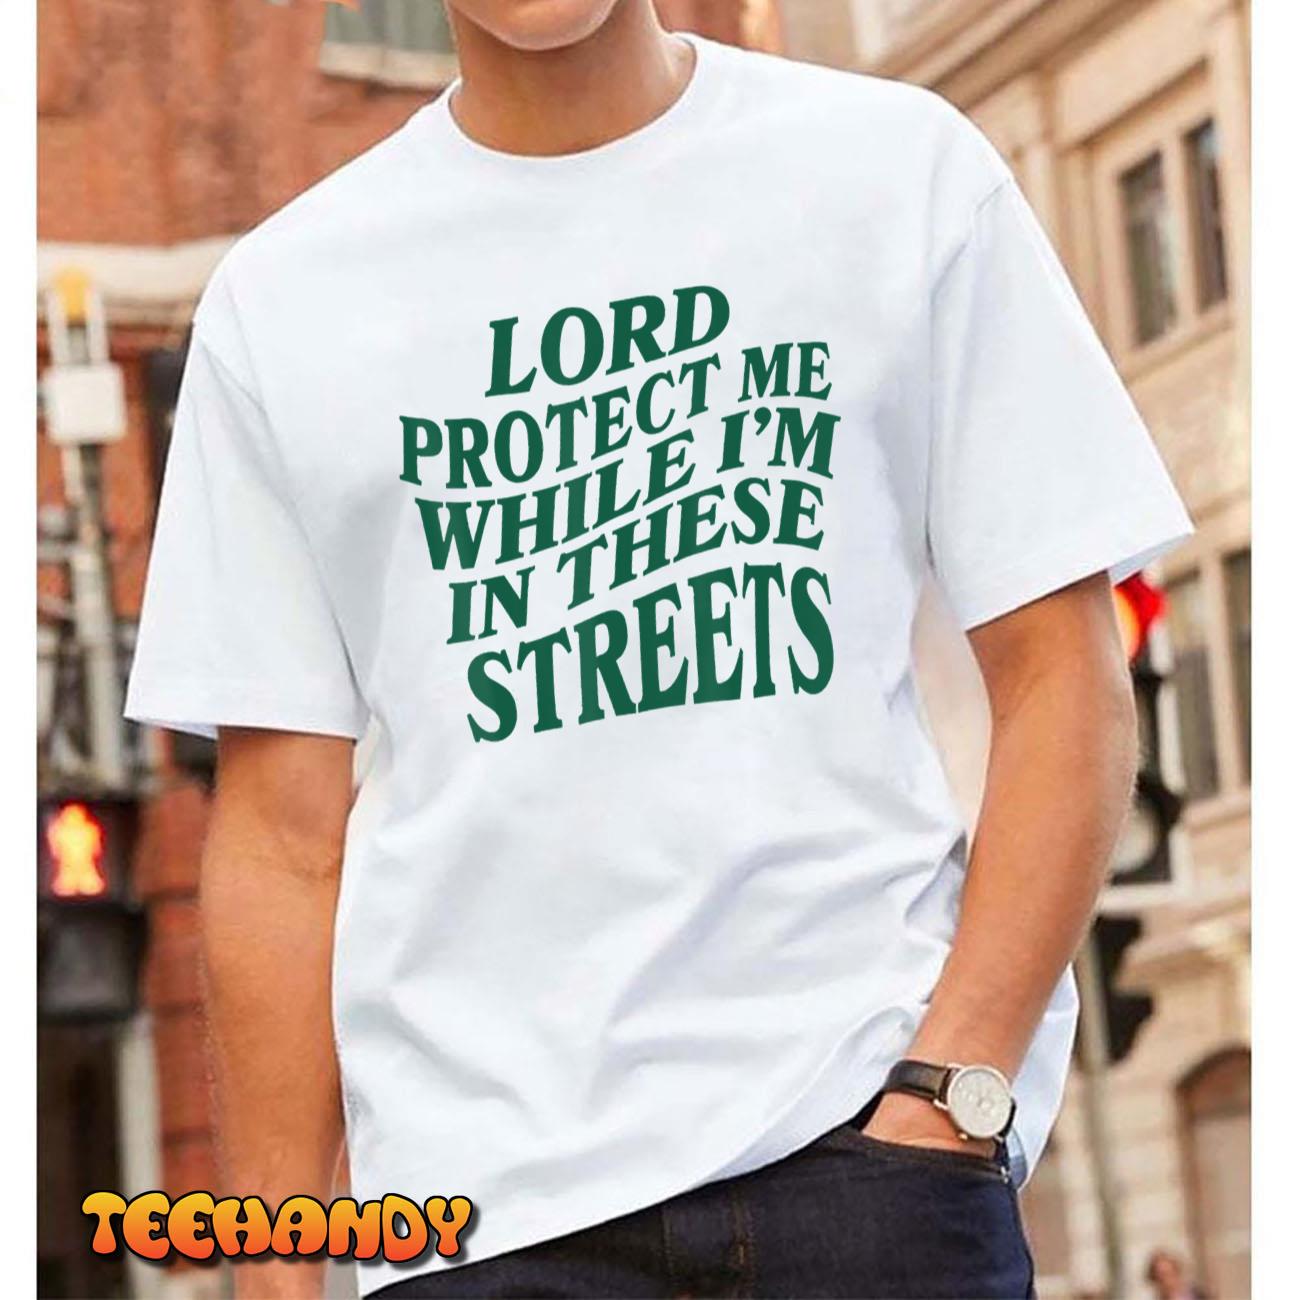 Lord Protect Me While I'm In These Streets T-Shirt